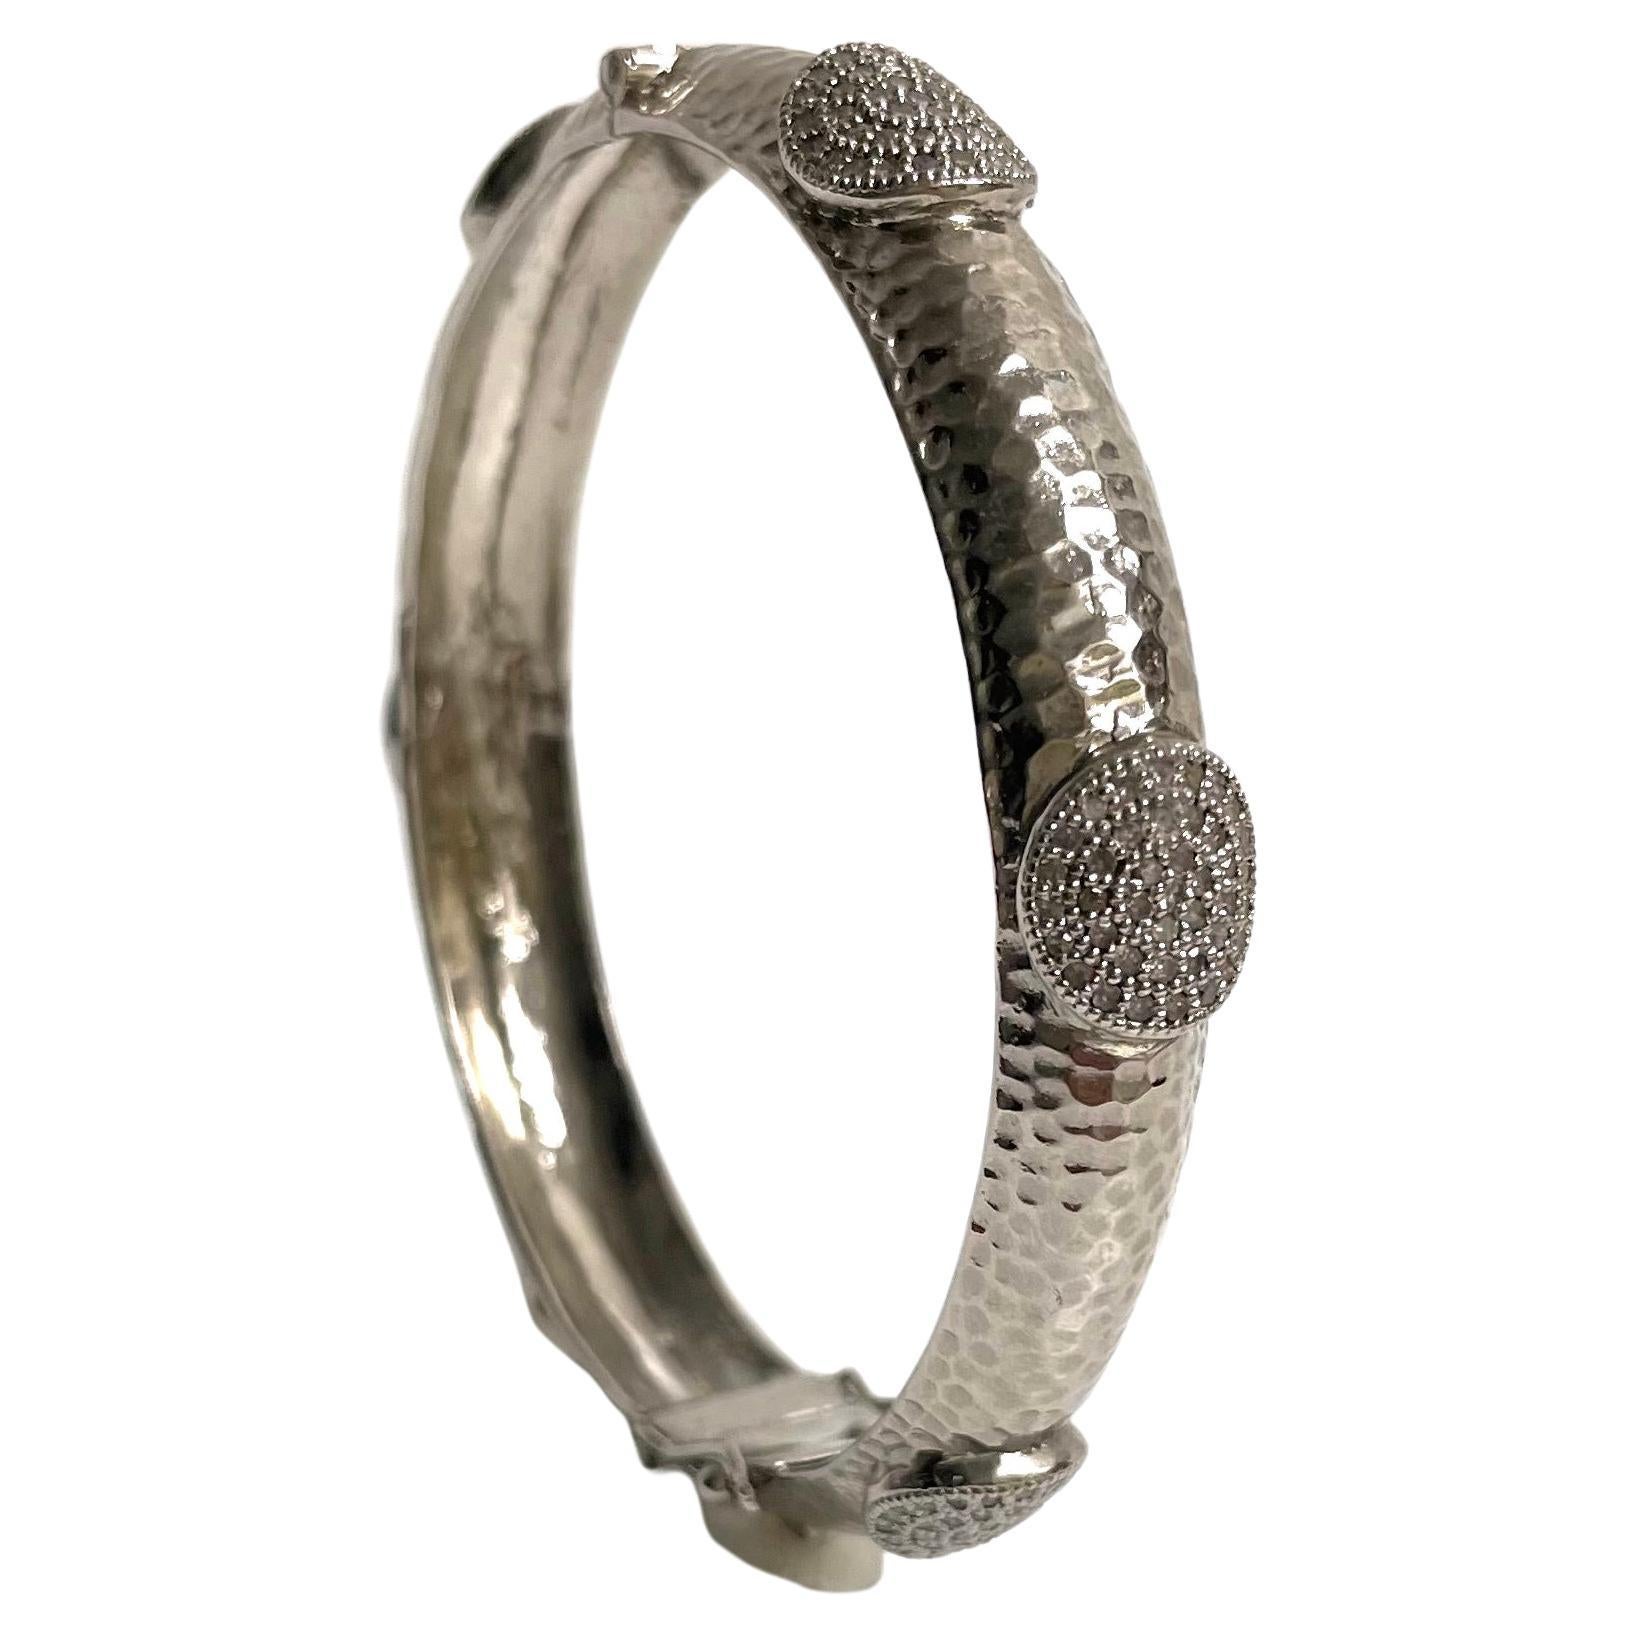  Hammered Rhodium-Plated Silver Bangle with Diamonds Paradizia Bracelet For Sale